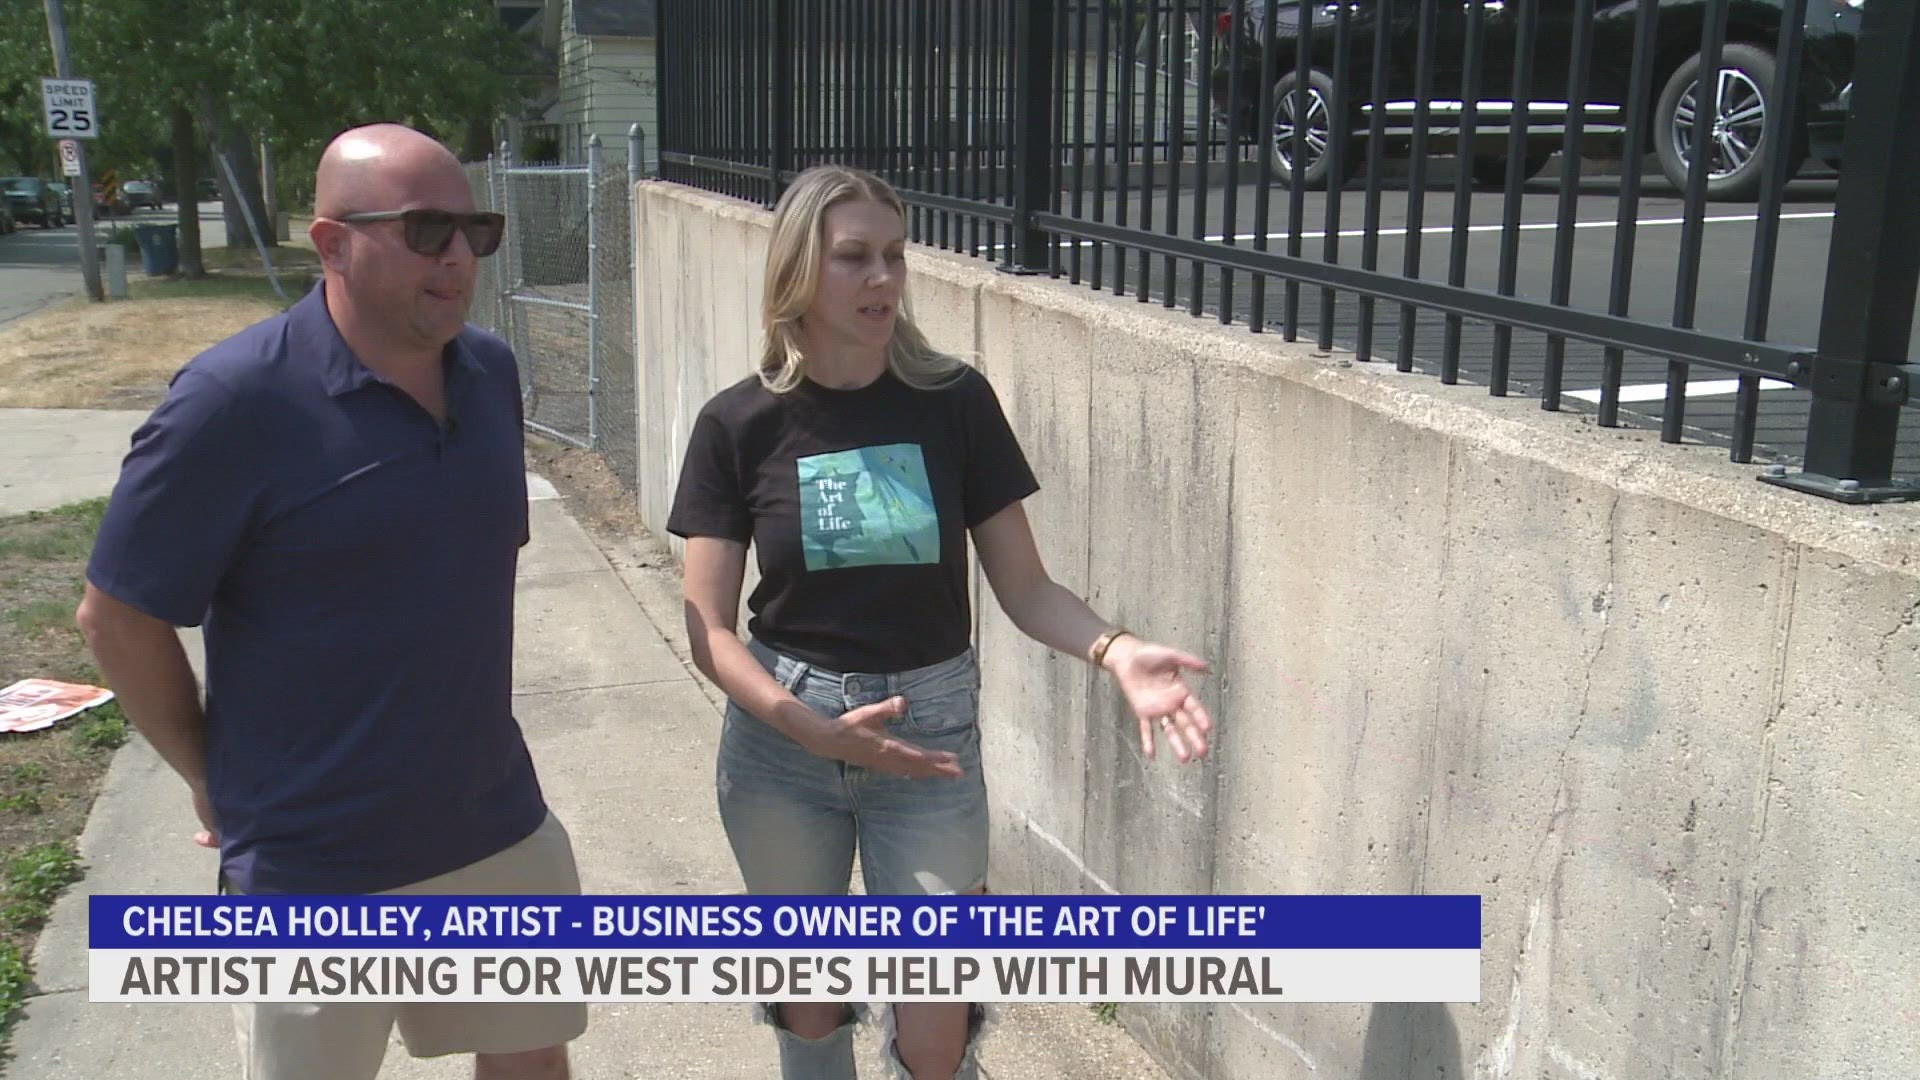 The artist and business owner want feedback on what they think represents the West Side.